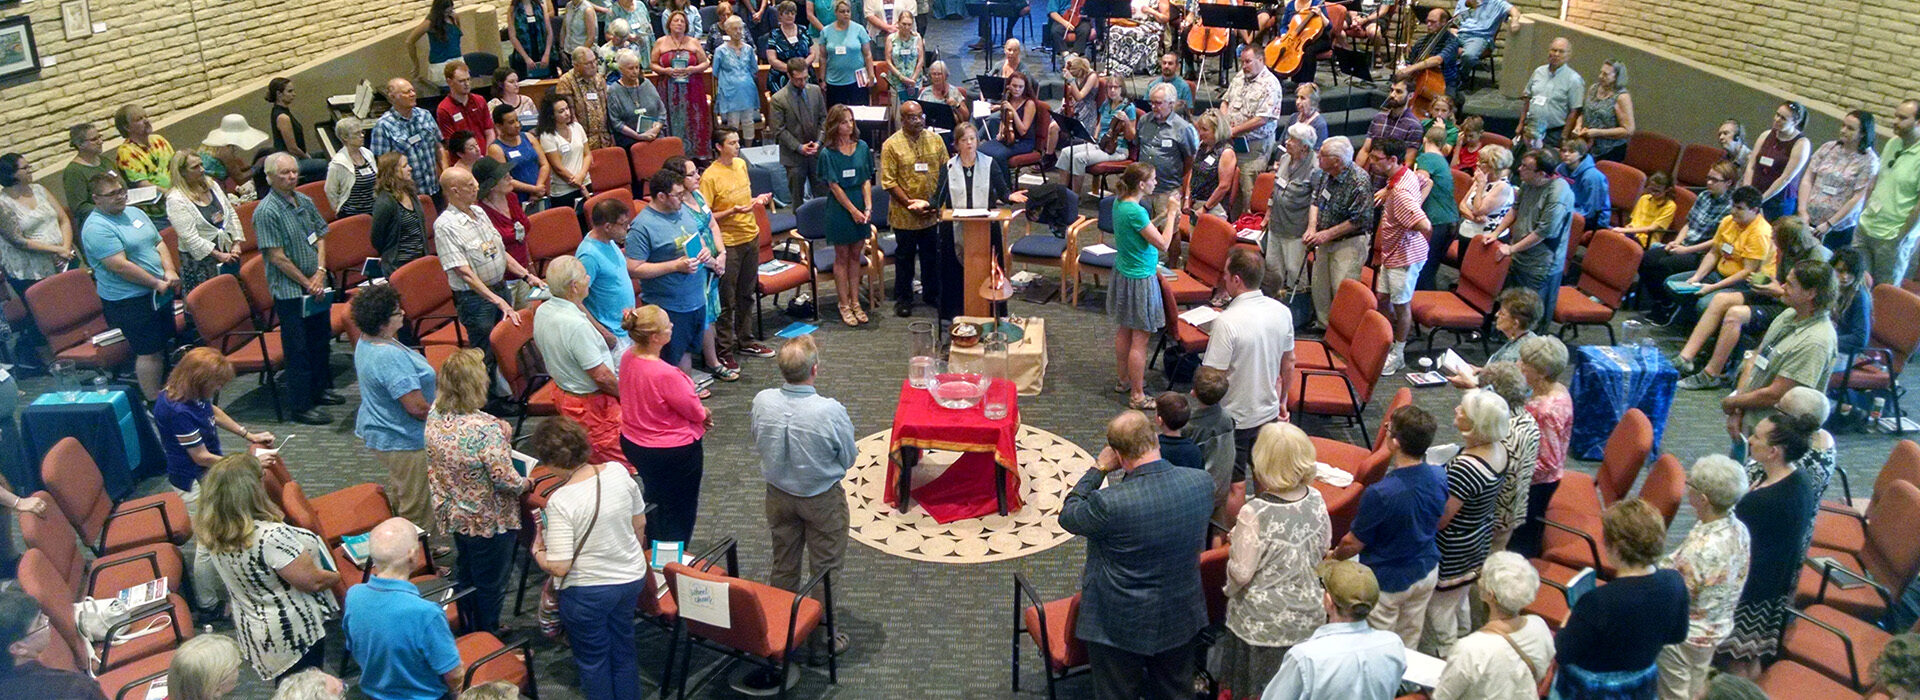 UUCP congregants gathered in the sanctuary for the Water Communion